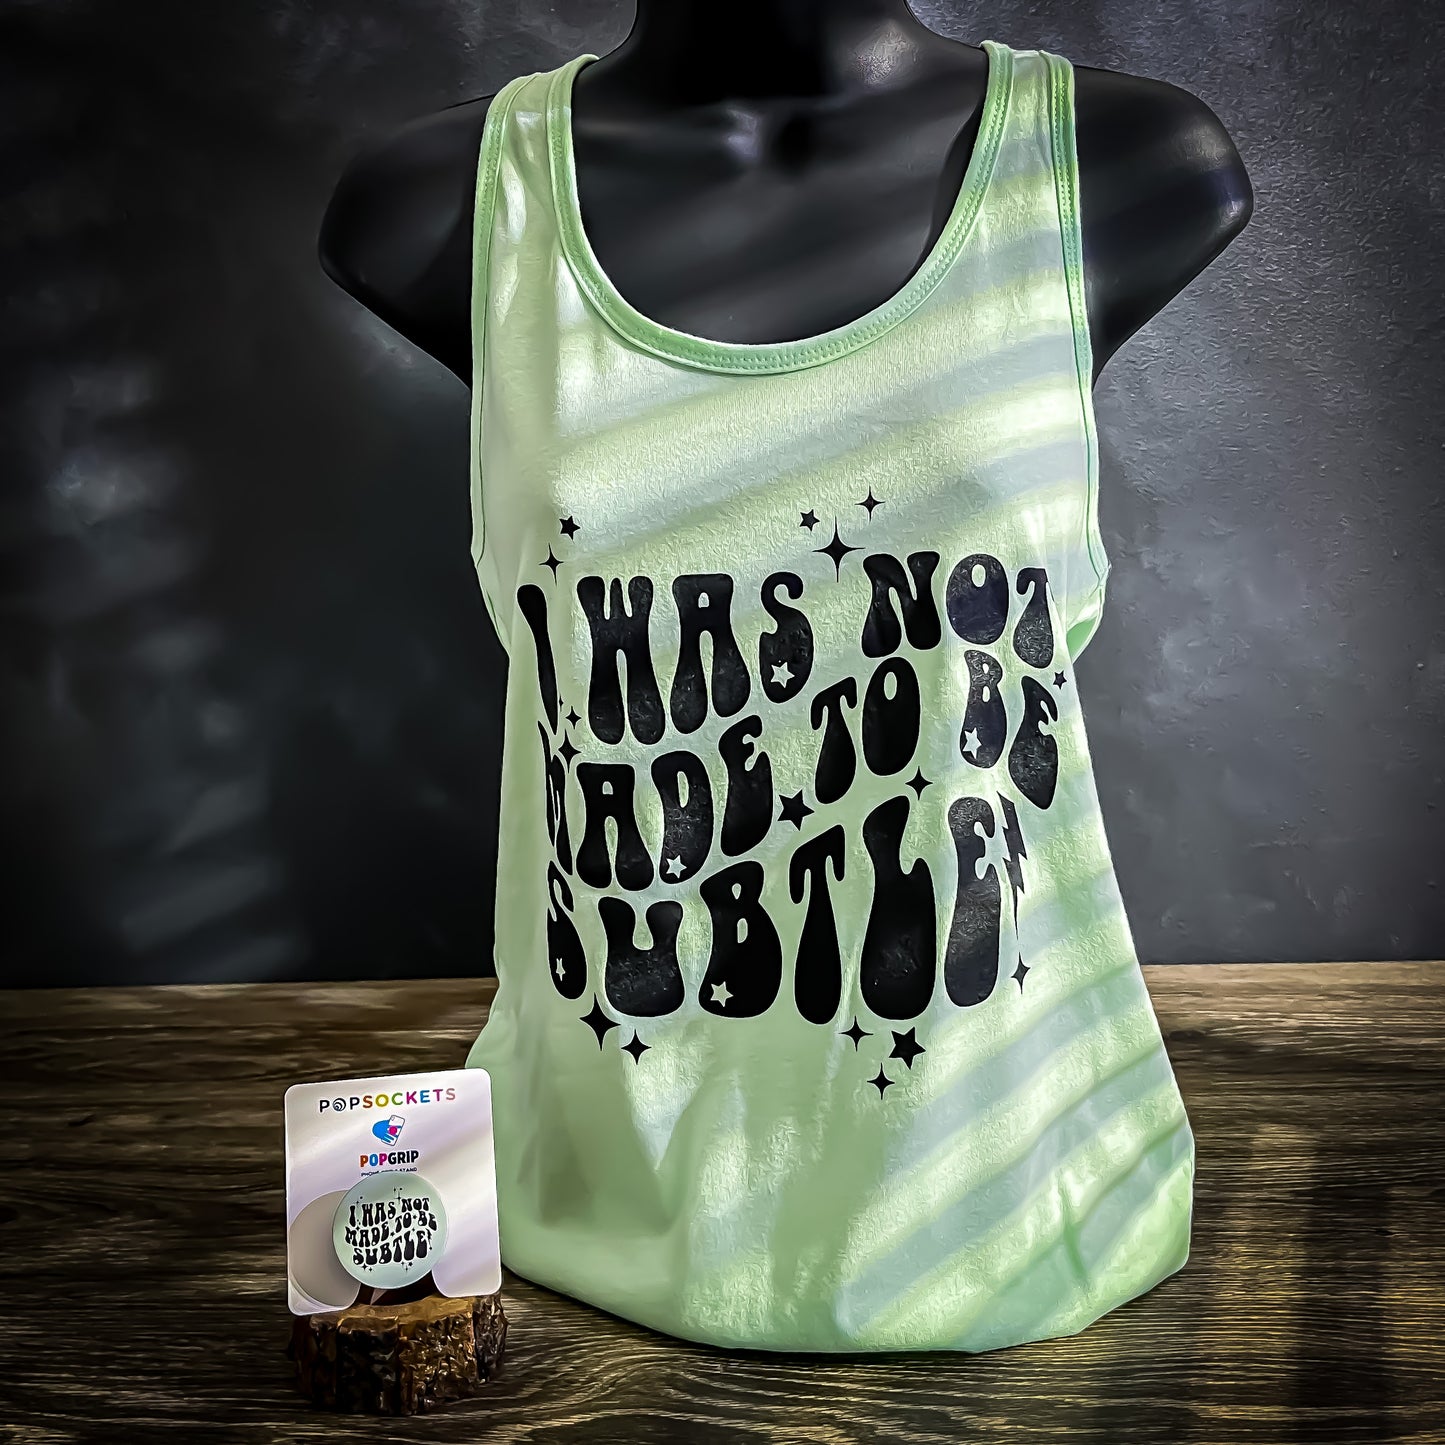 Ladies - "I Was Not Made To Be Subtle" Tank Top And Pop Socket Set